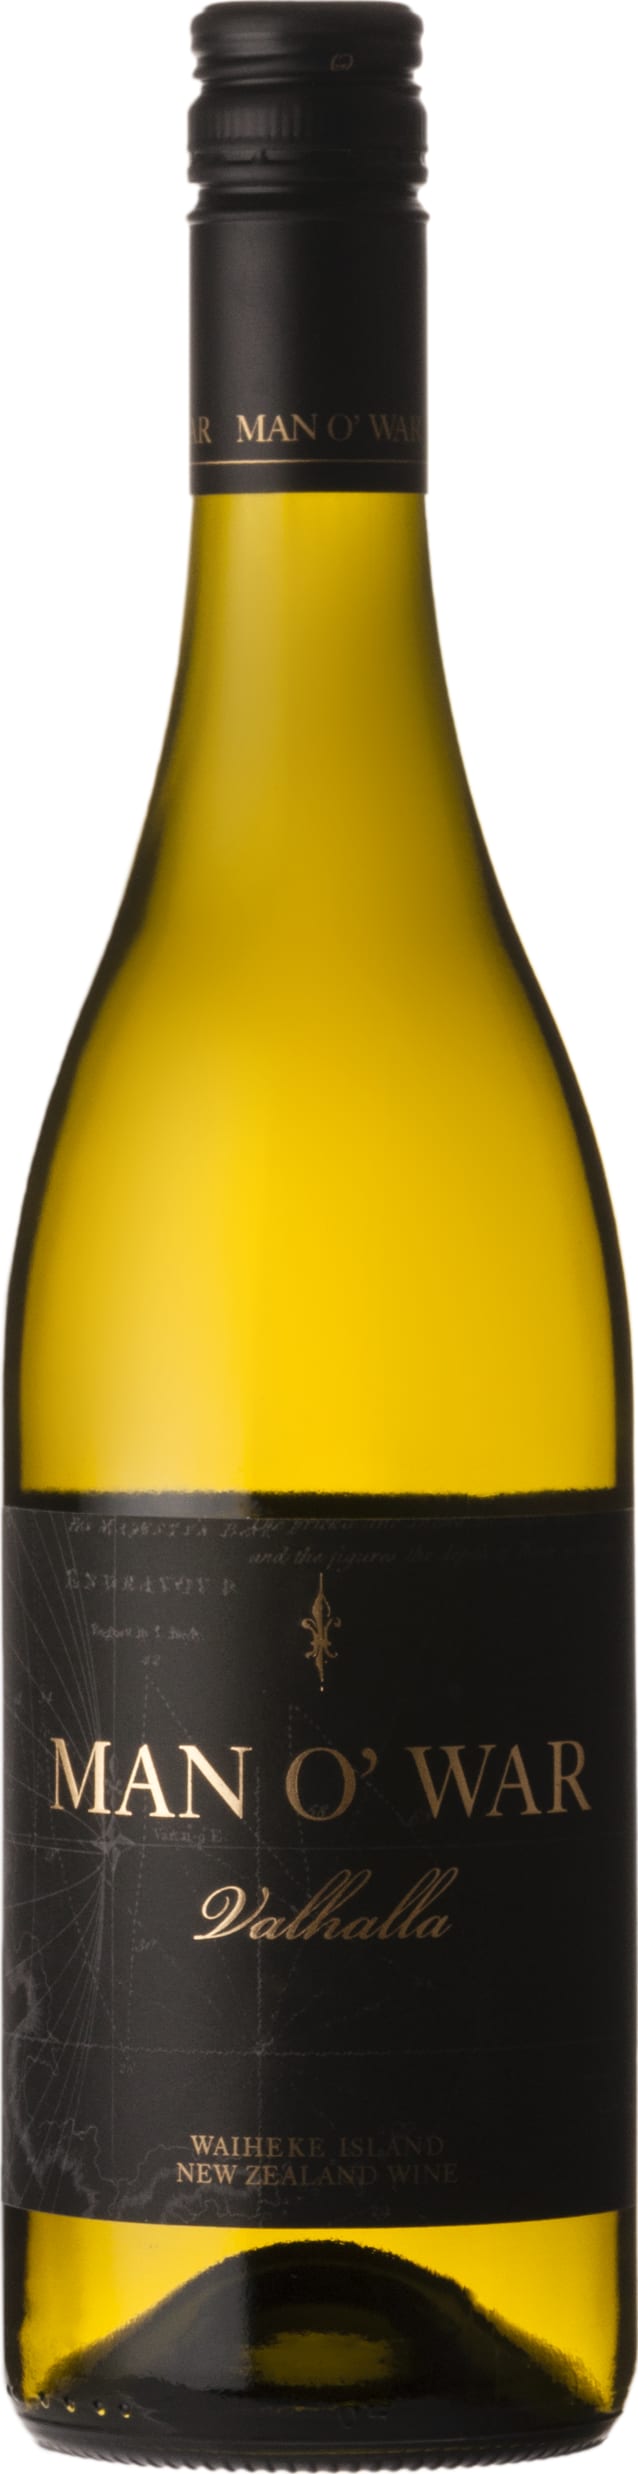 Man O' War Valhalla Chardonnay 2021 75cl - Buy Man O' War Wines from GREAT WINES DIRECT wine shop